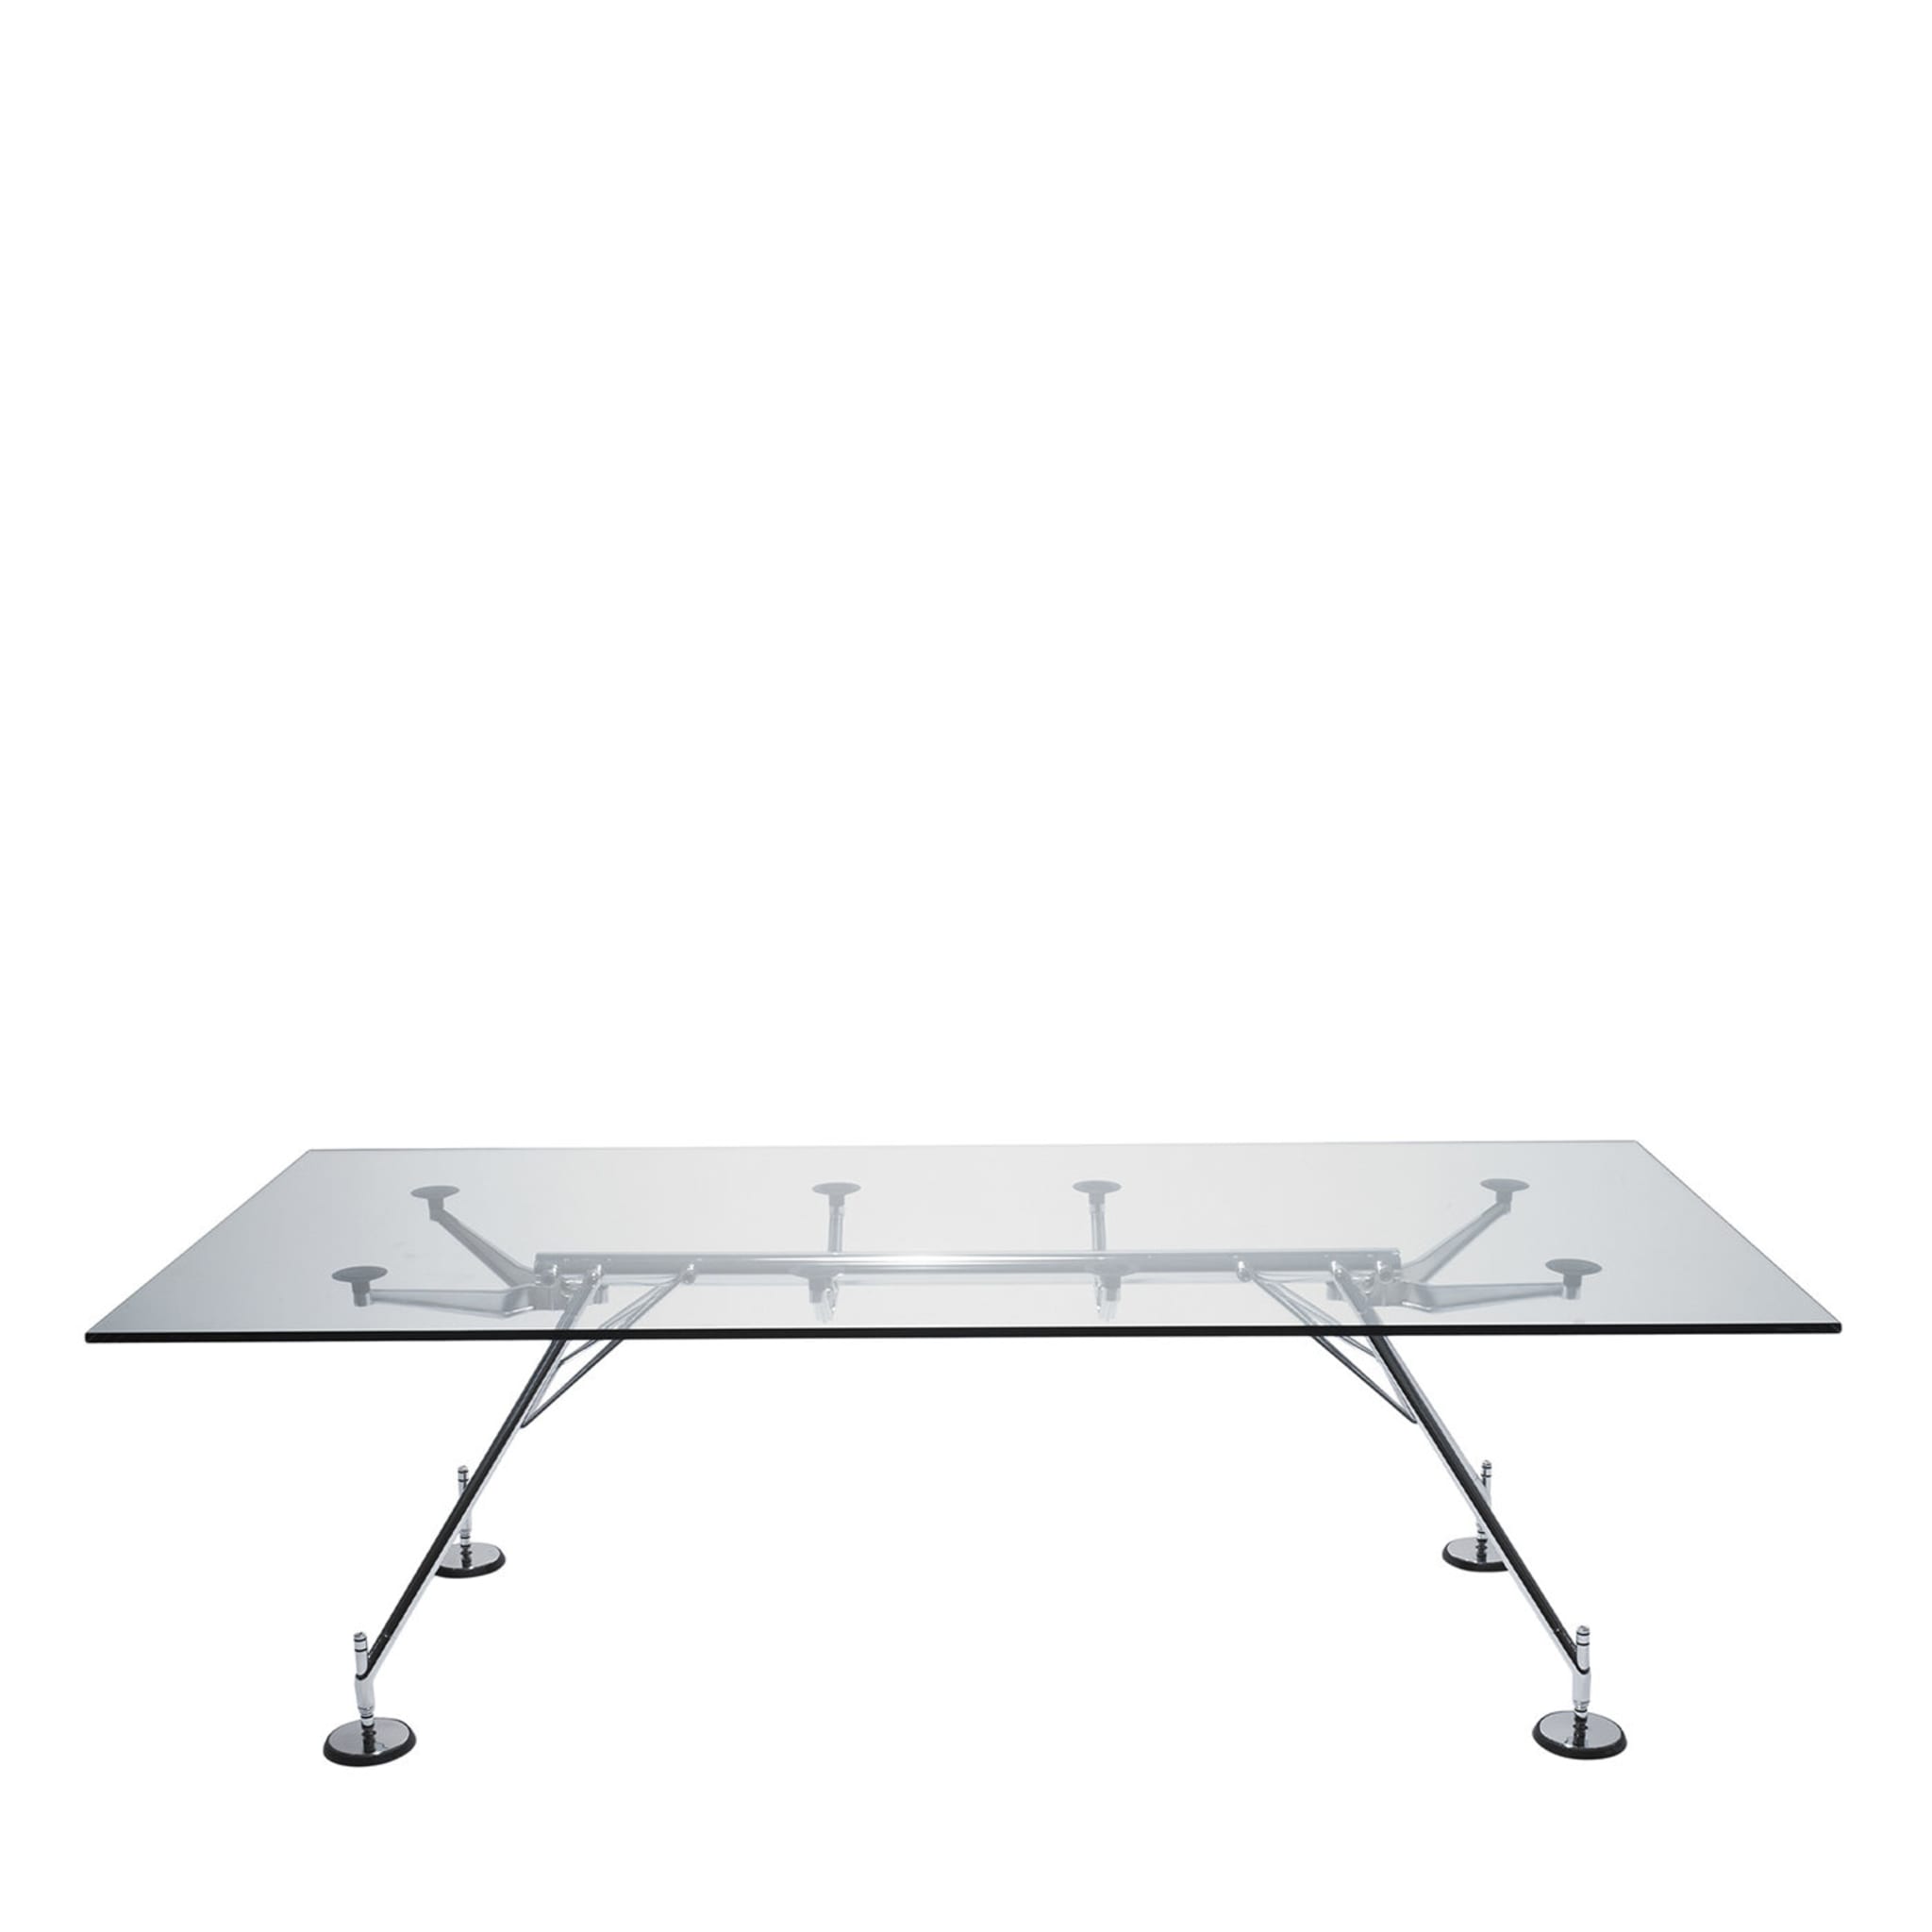 Nomos Chrome Table by Norman Foster - Main view